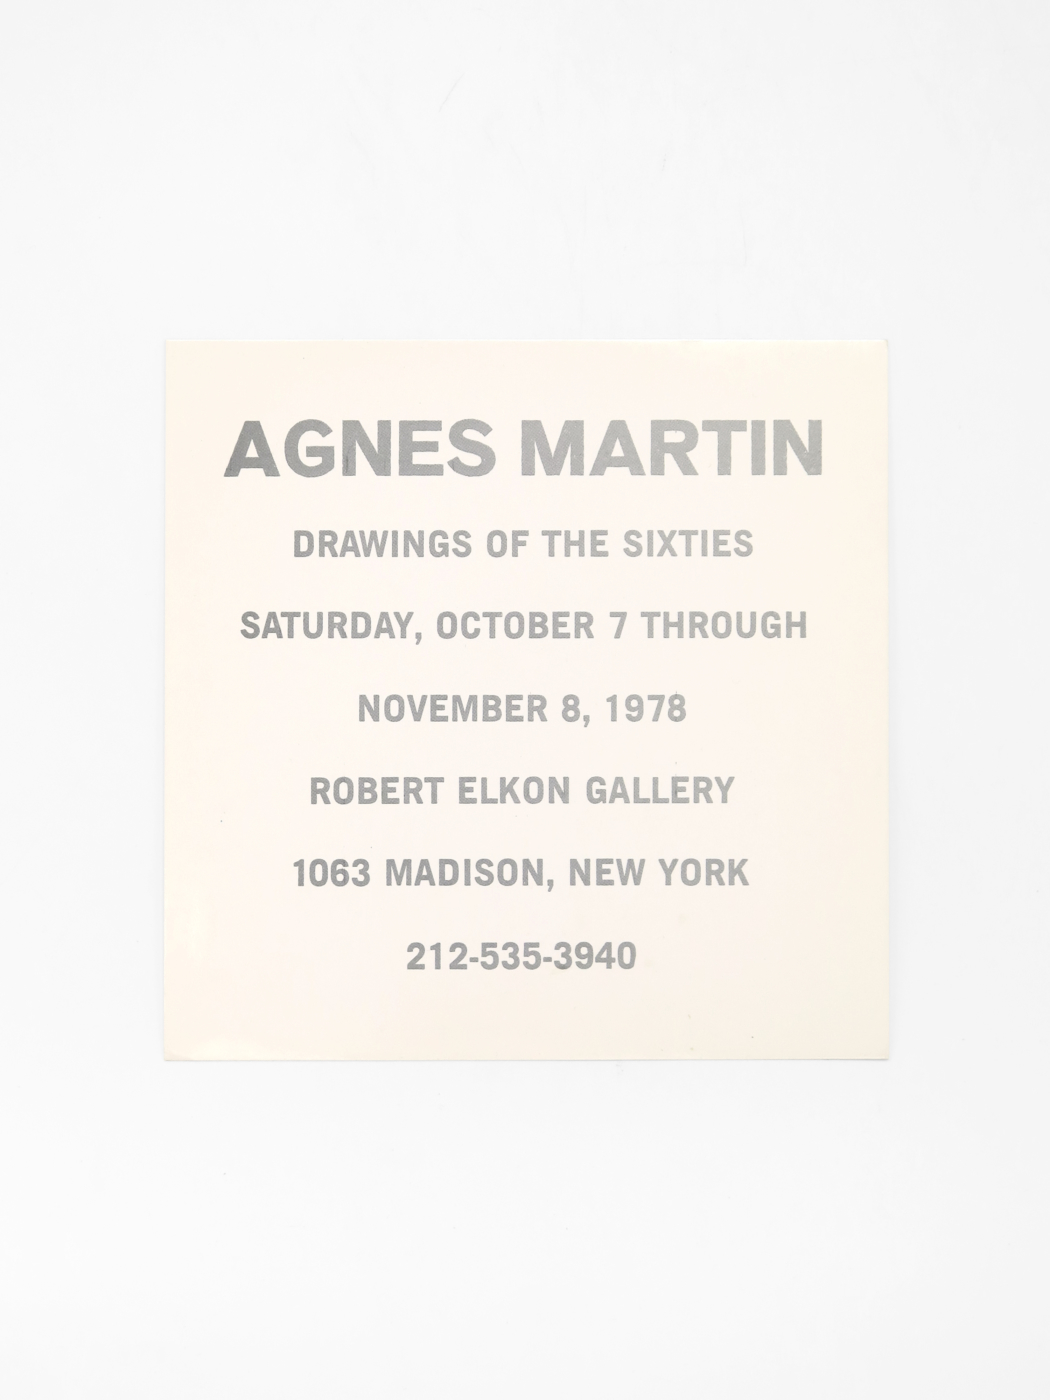 Agnes Martin, Drawings of the Sixties